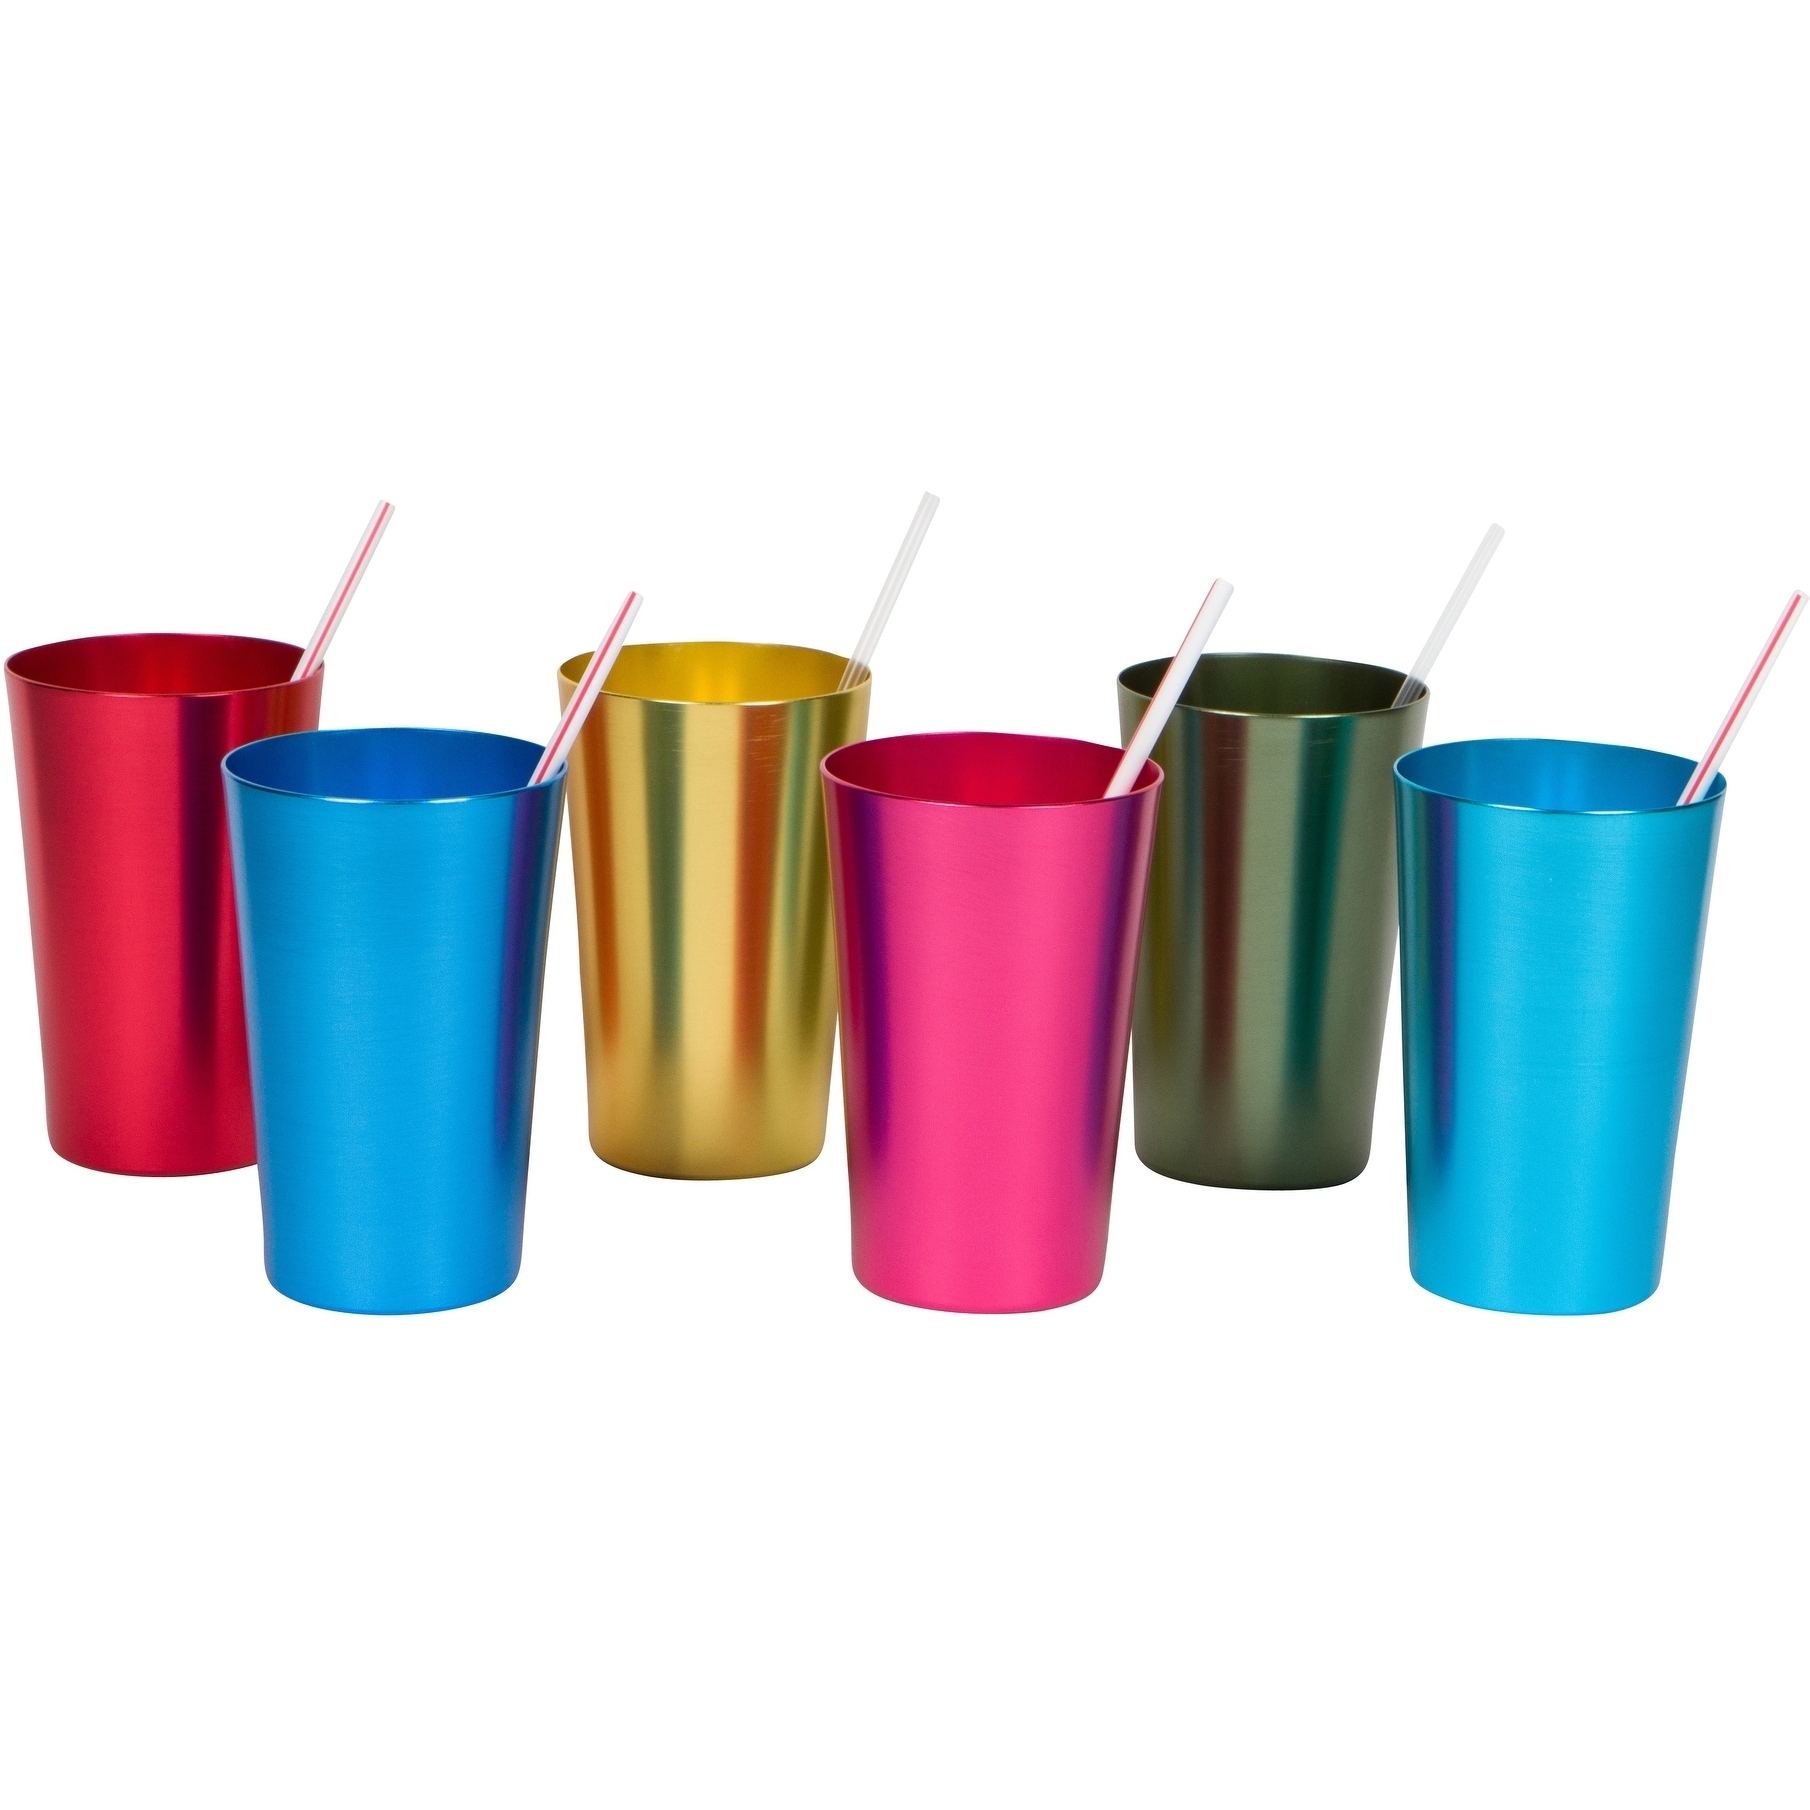 Retro Aluminum Tumblers, 6 Cups, 12 oz, by Trademark Innovations, Assorted Colors